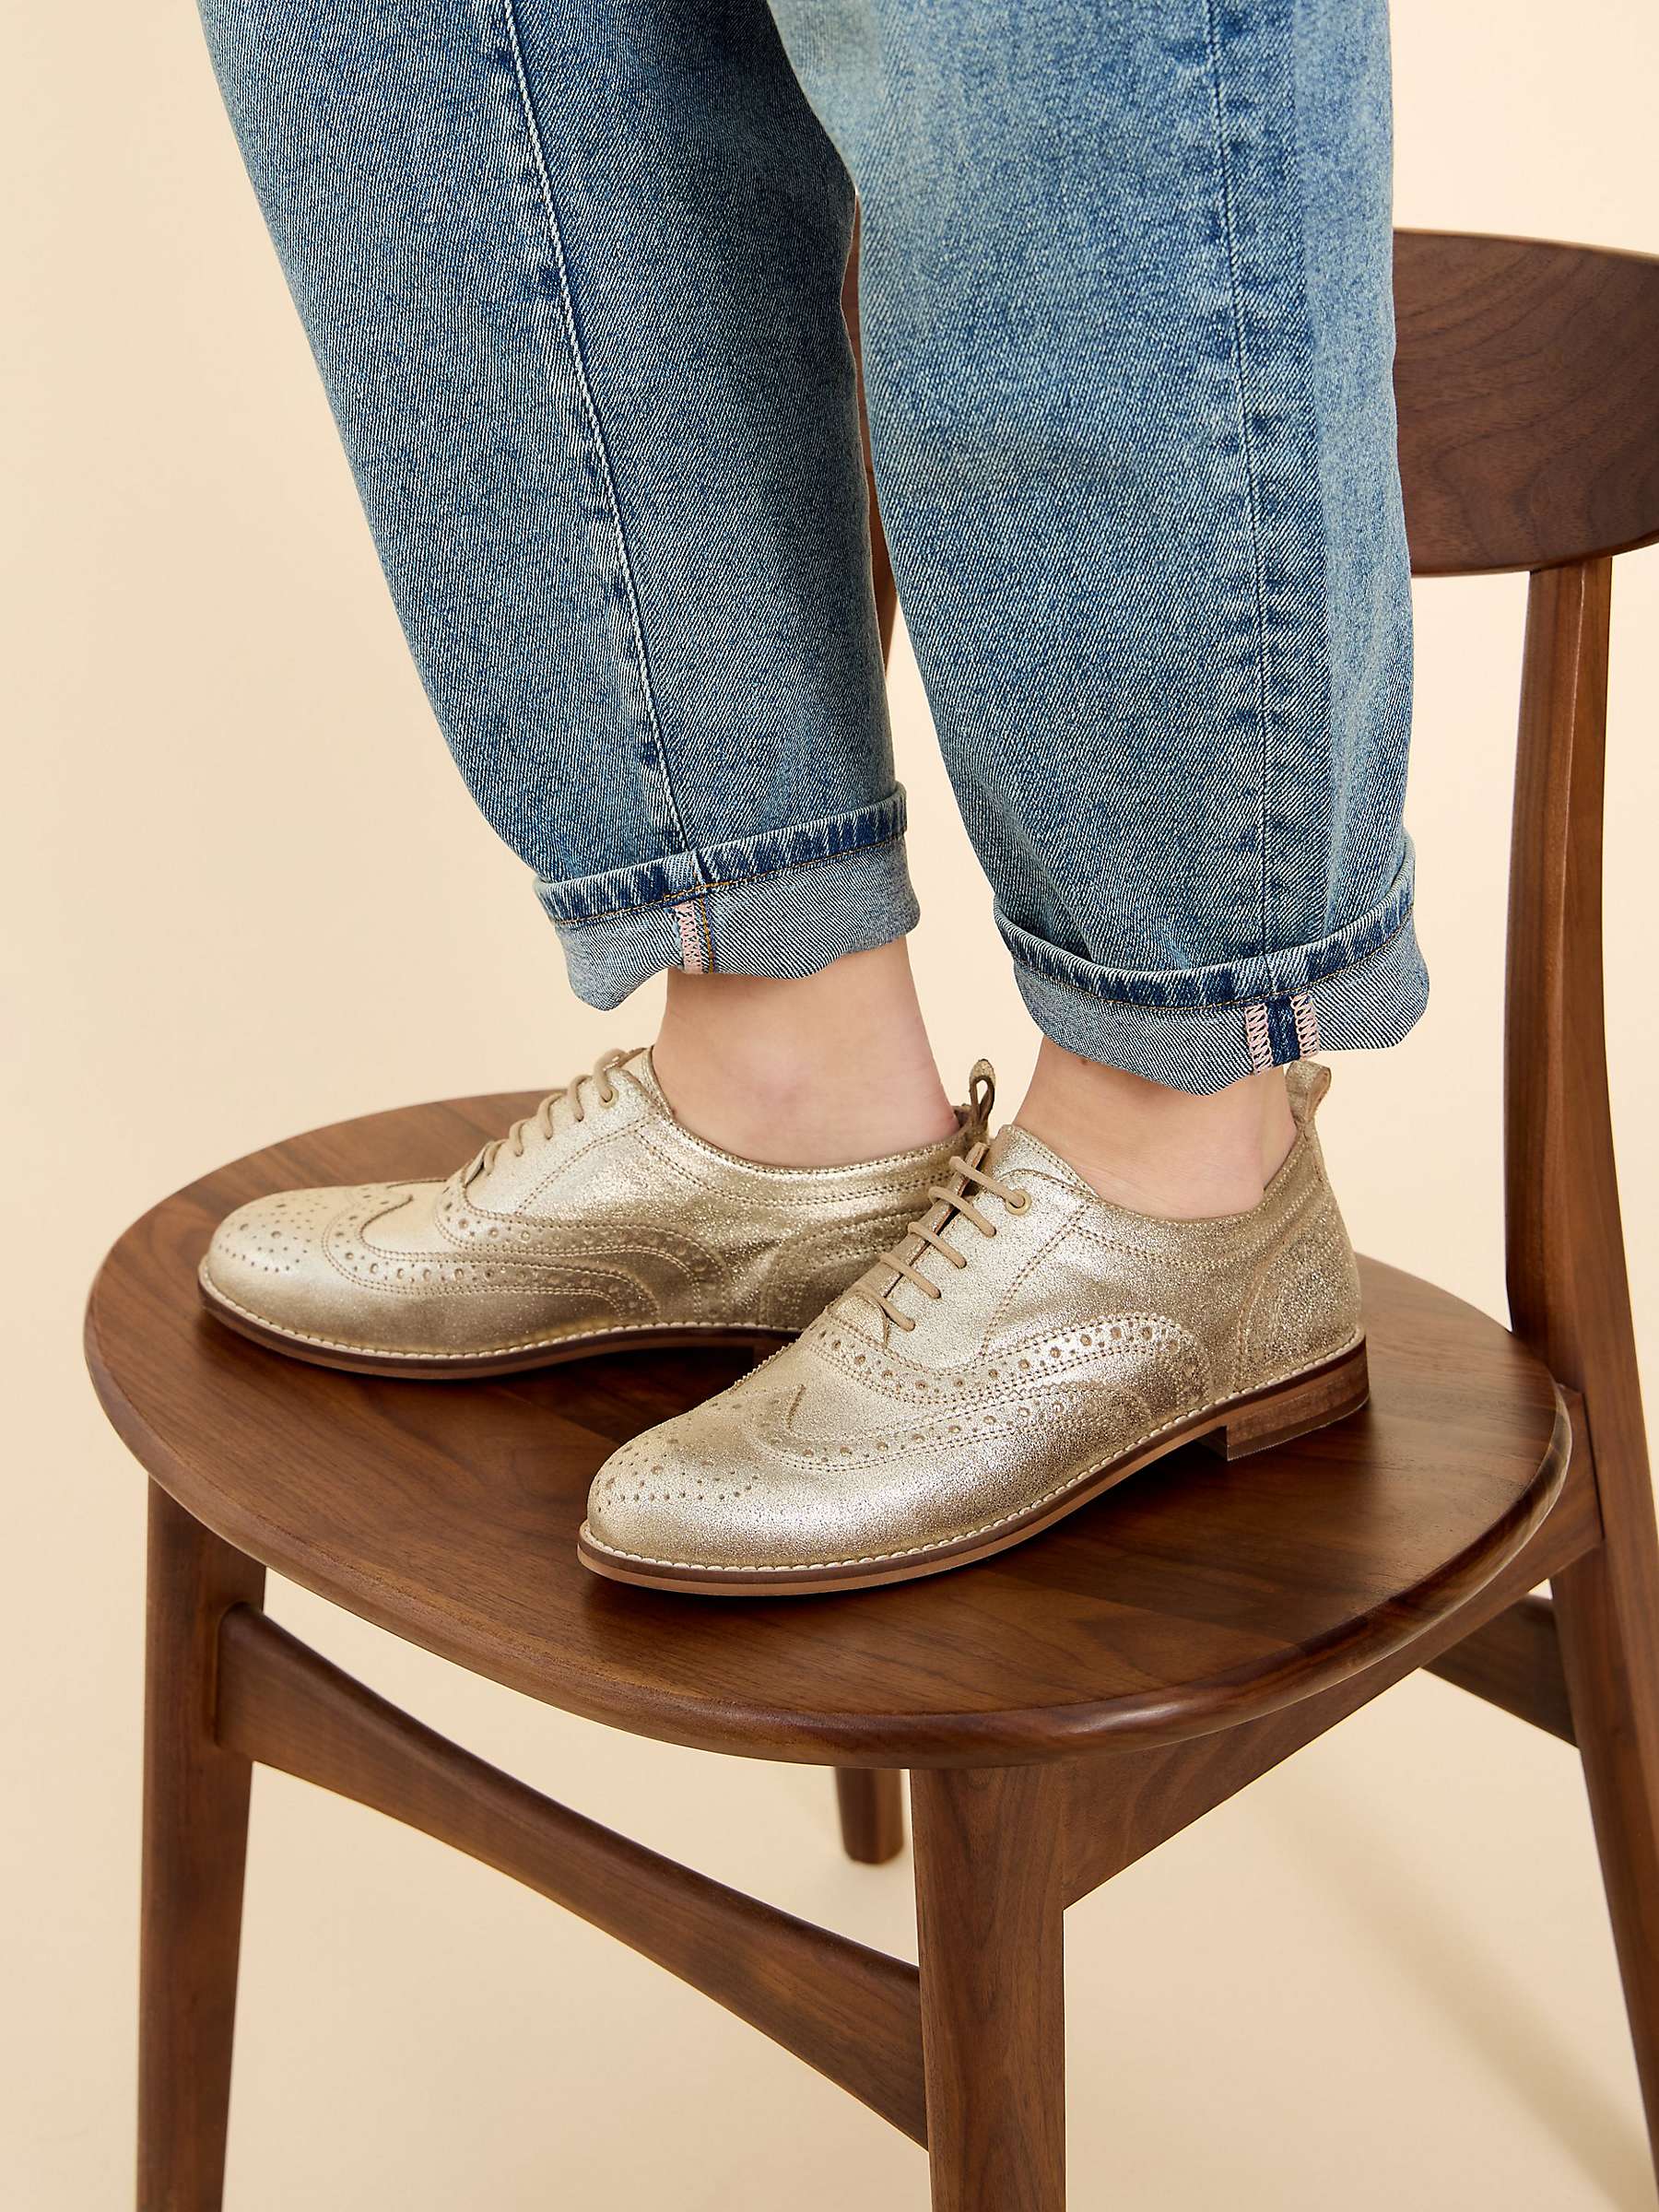 Buy White Stuff Lace Up Leather Brogues Online at johnlewis.com